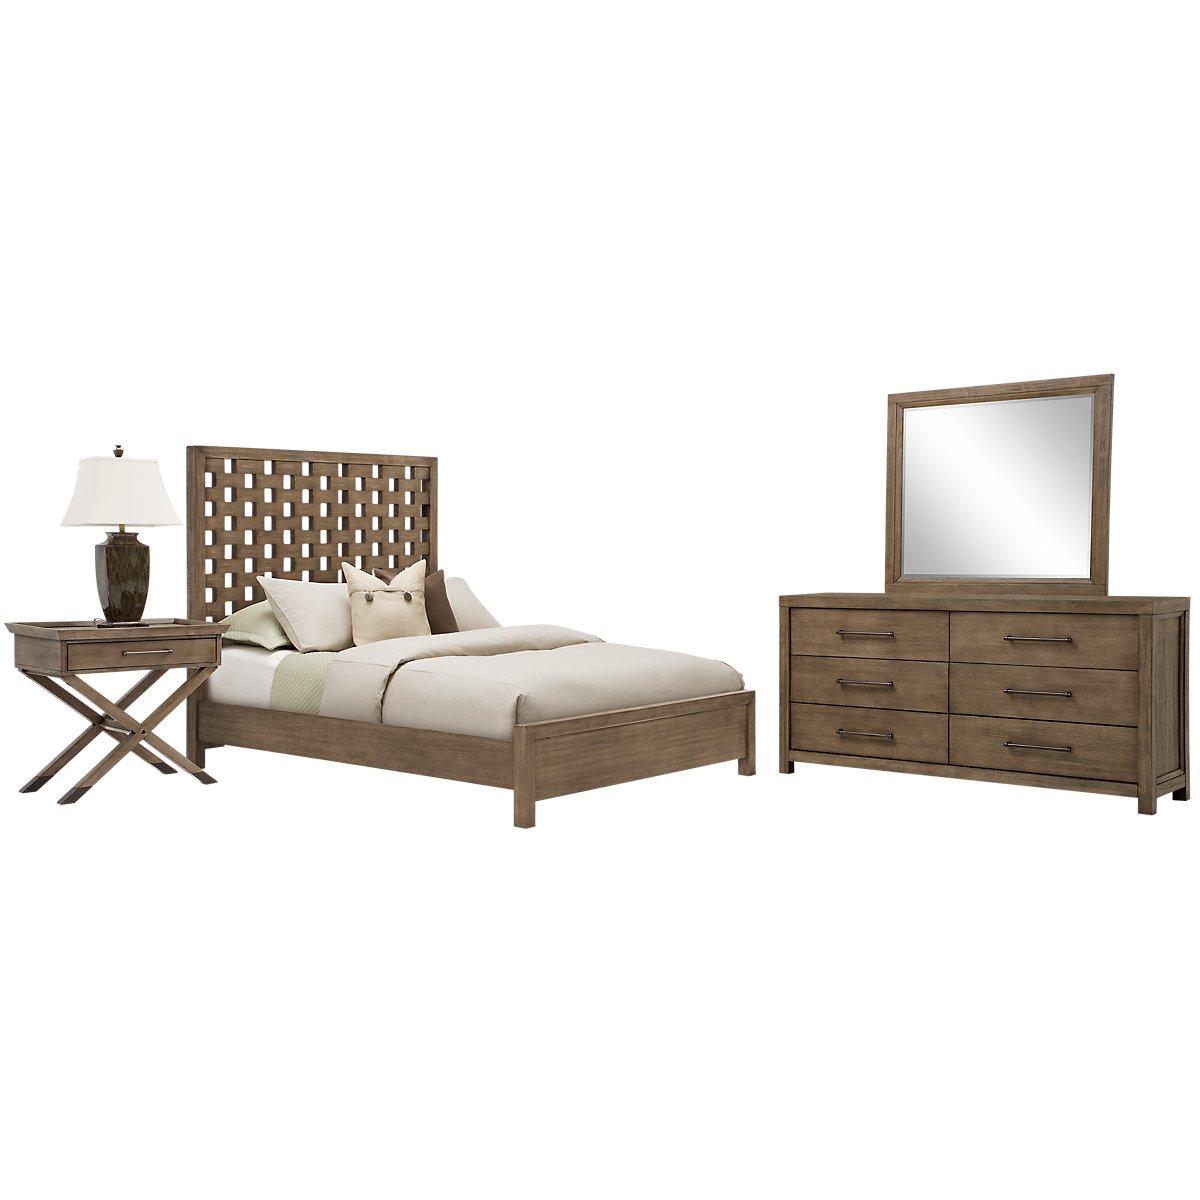 City Furniture: Mirabelle Light Tone Panel Bed